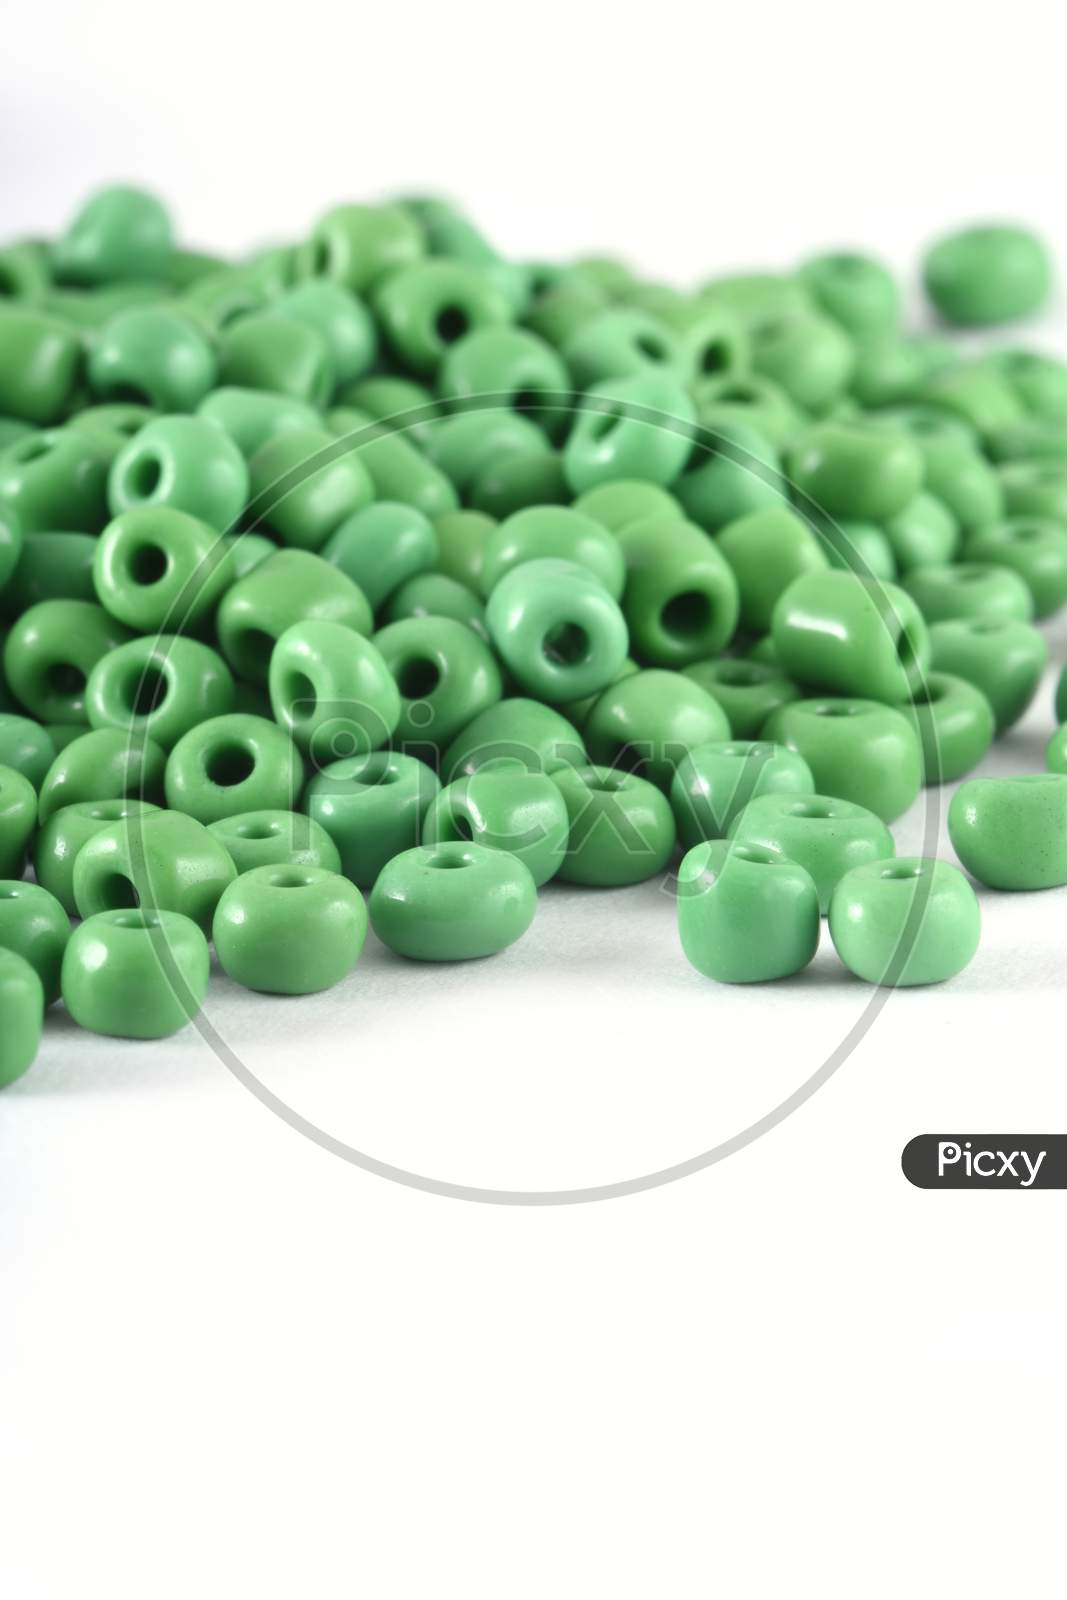 Close Up Of Green Beads On The White Background. Background Or Texture Of Beads. Macro,It Is Used In Finishing Fashion Clothes. Make Bead Necklace Or String Of Beads For Woman Of Fashion.